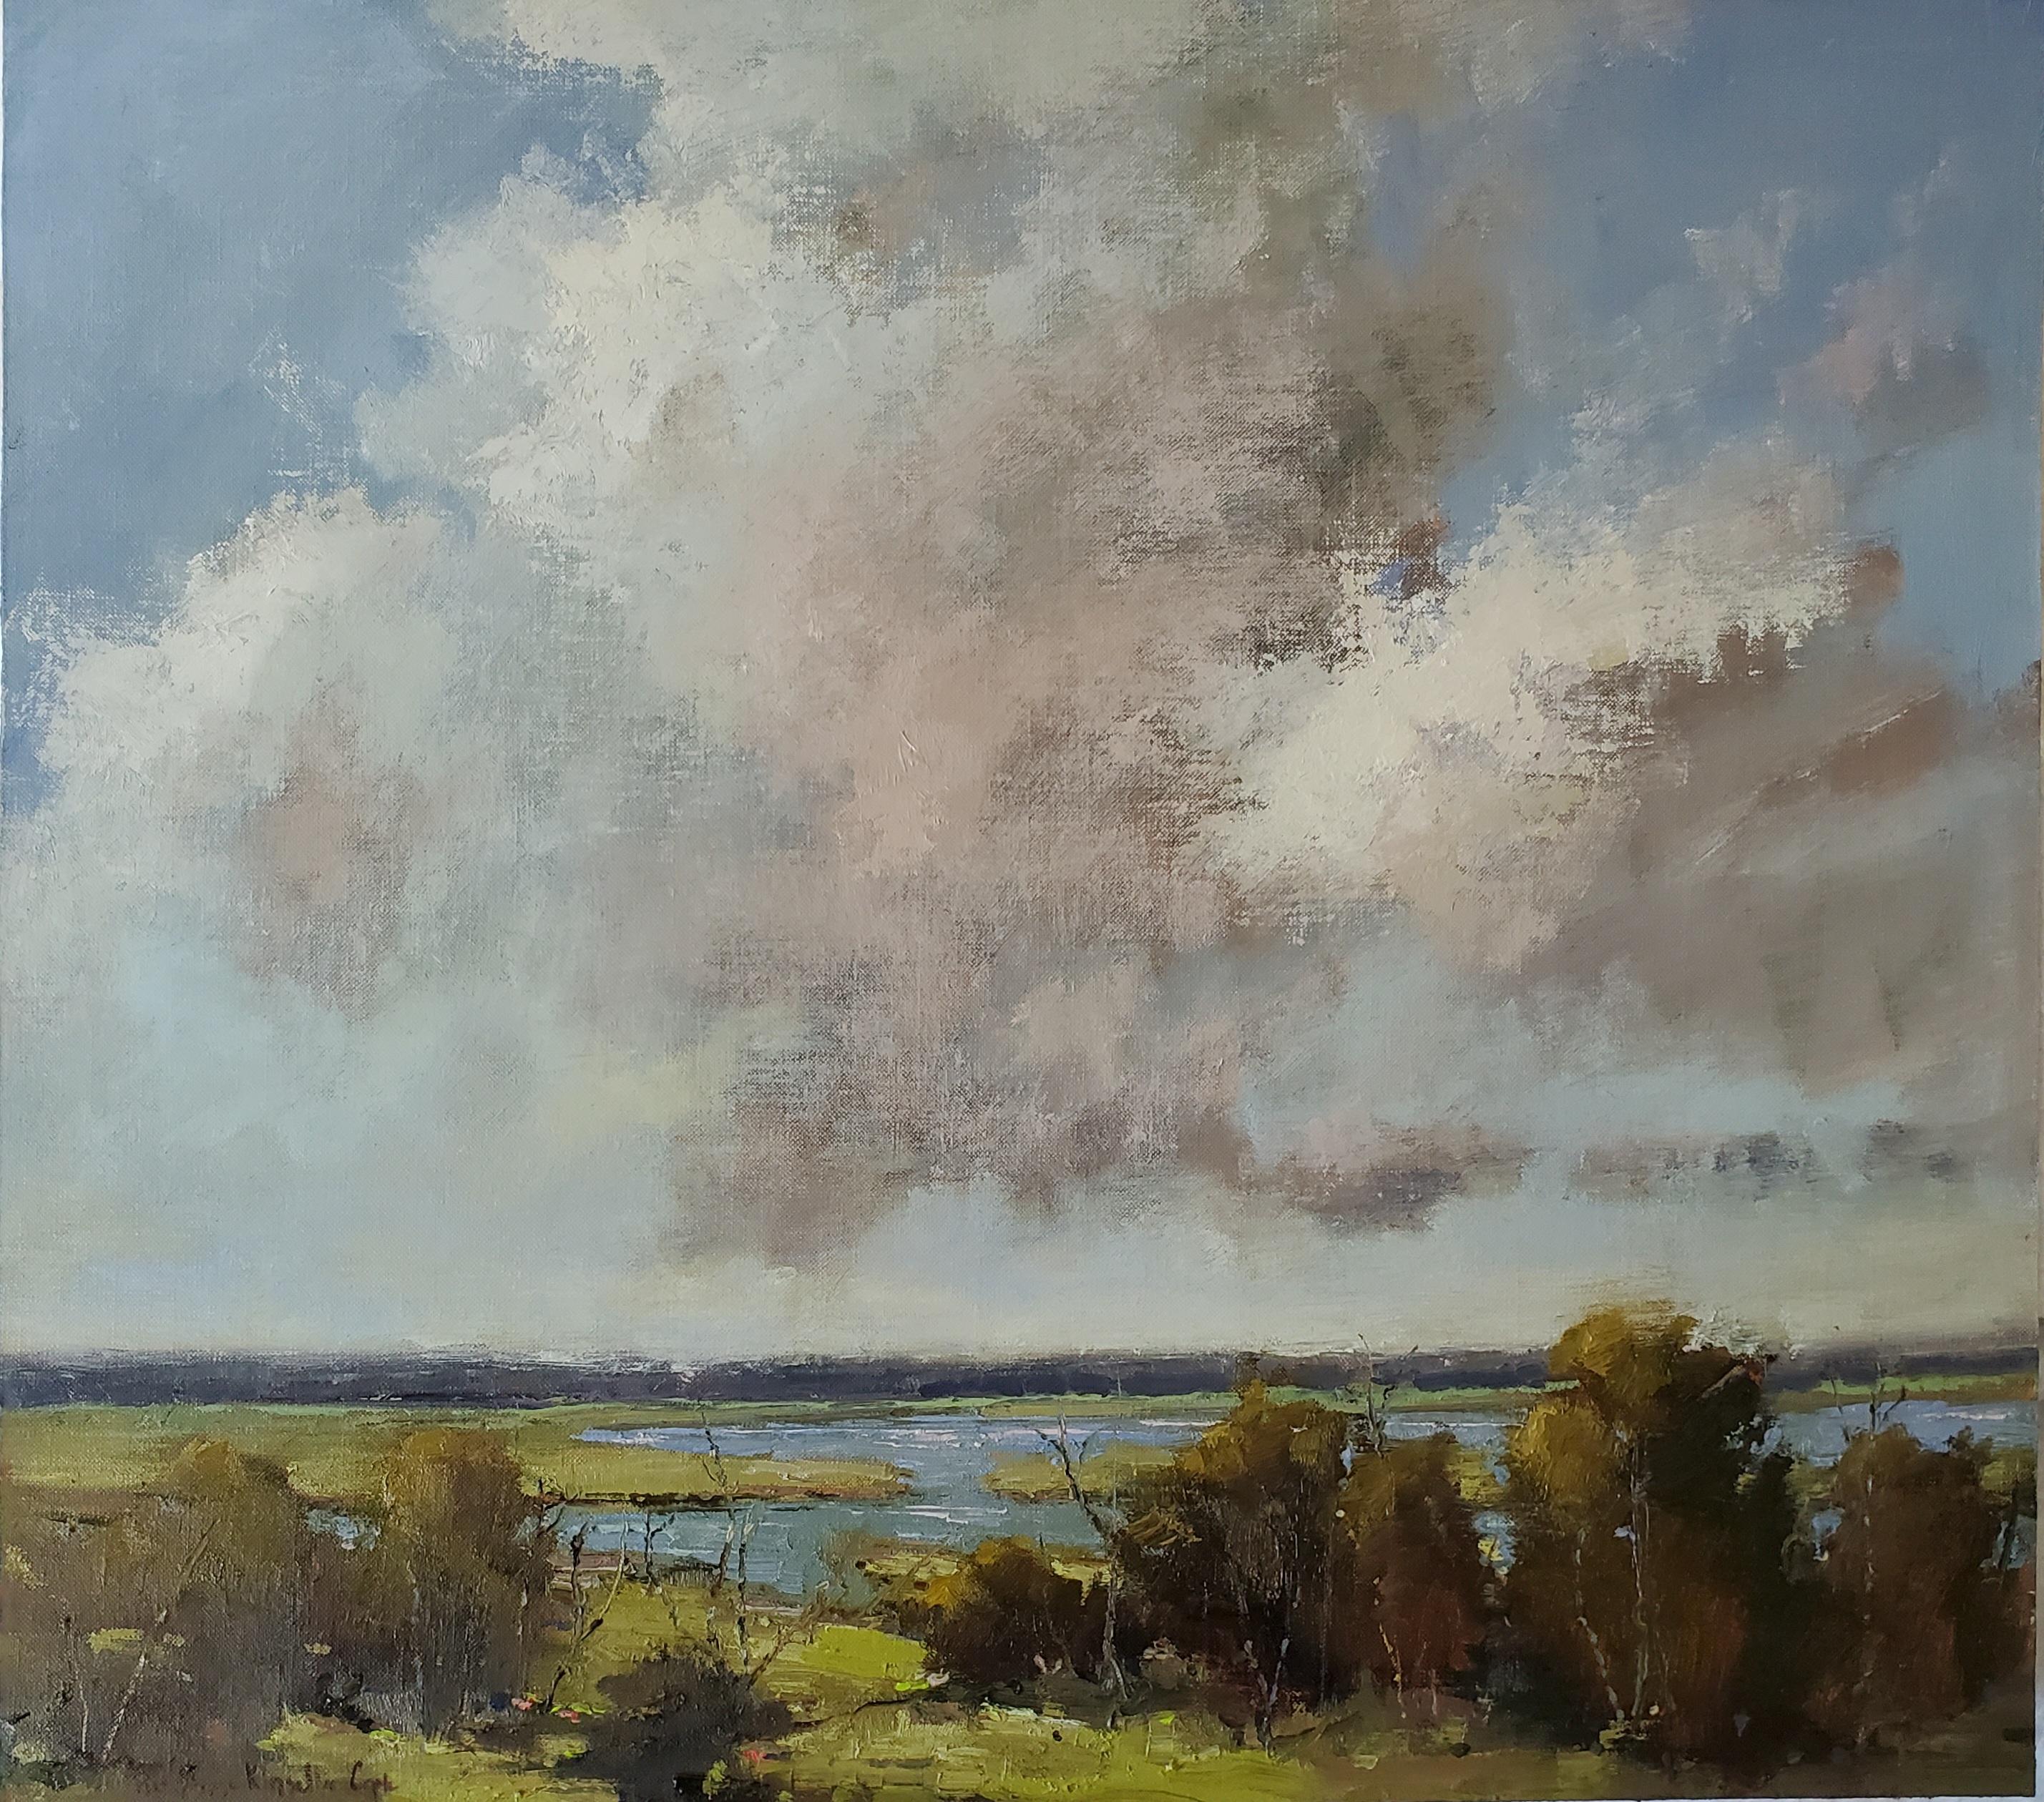 Bethanne Kinsella Cople Landscape Painting - Beneath the Sky by Bethanne Cople, Oil on Board Framed Landscape painting